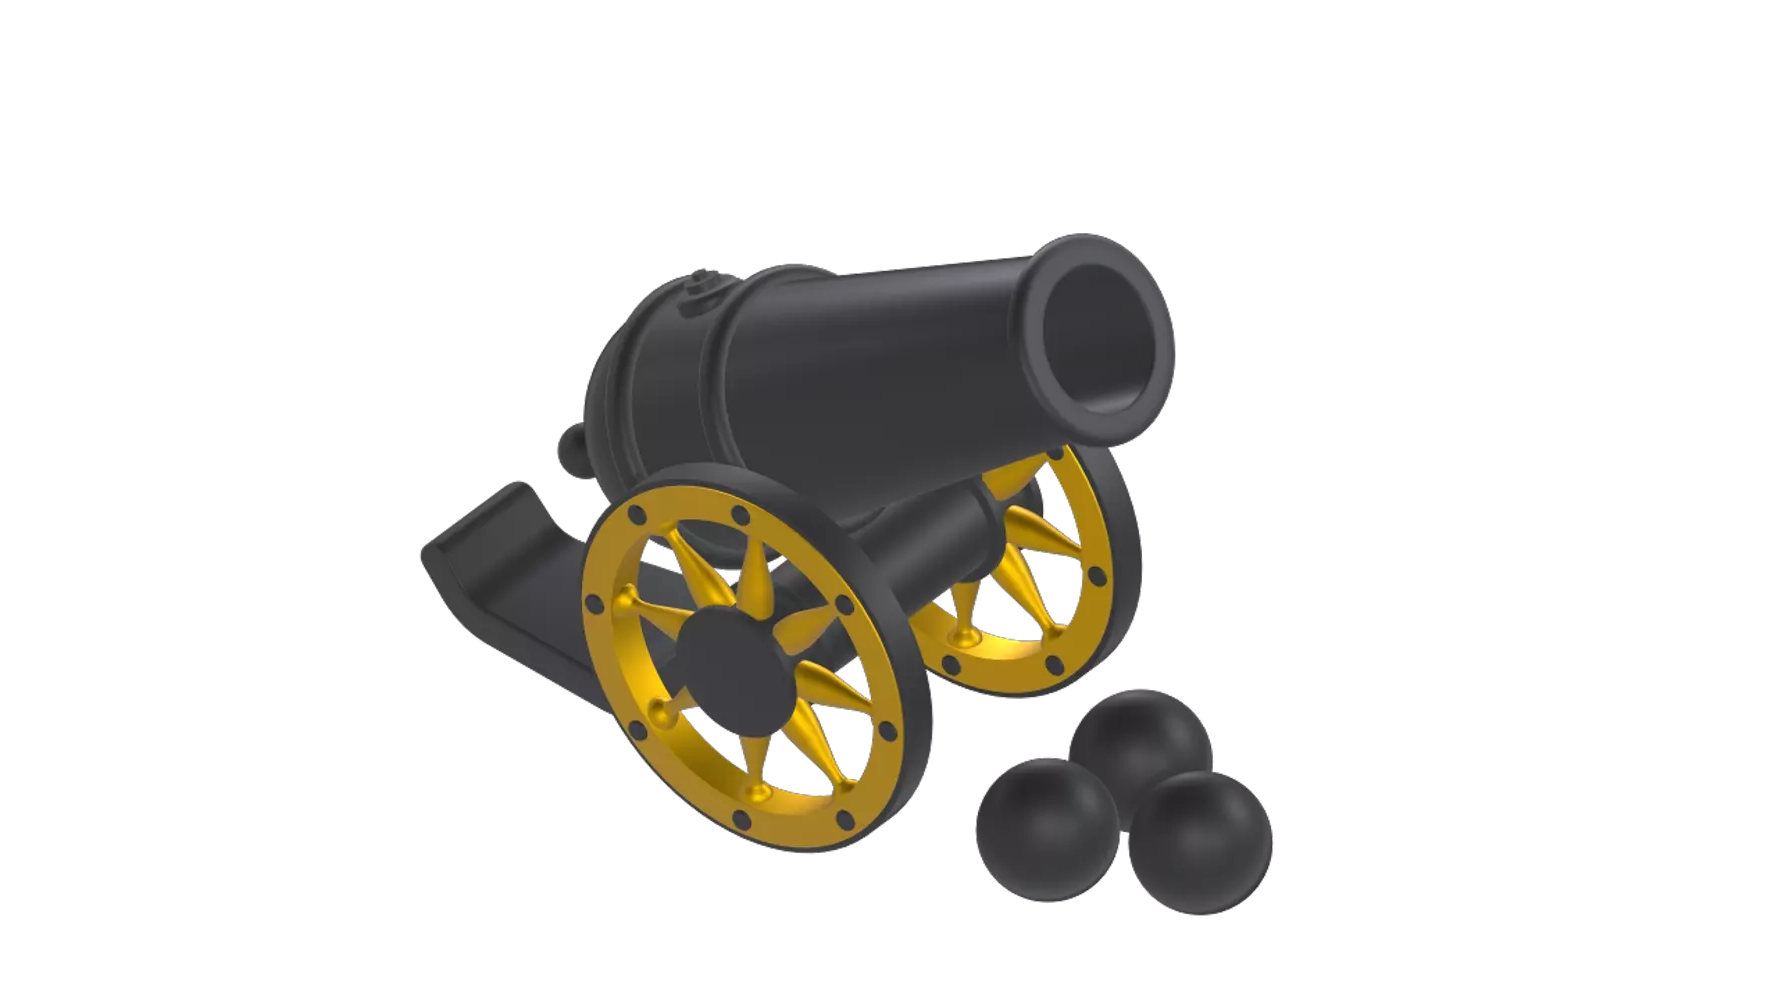 Islamic Cannon 3D Graphic